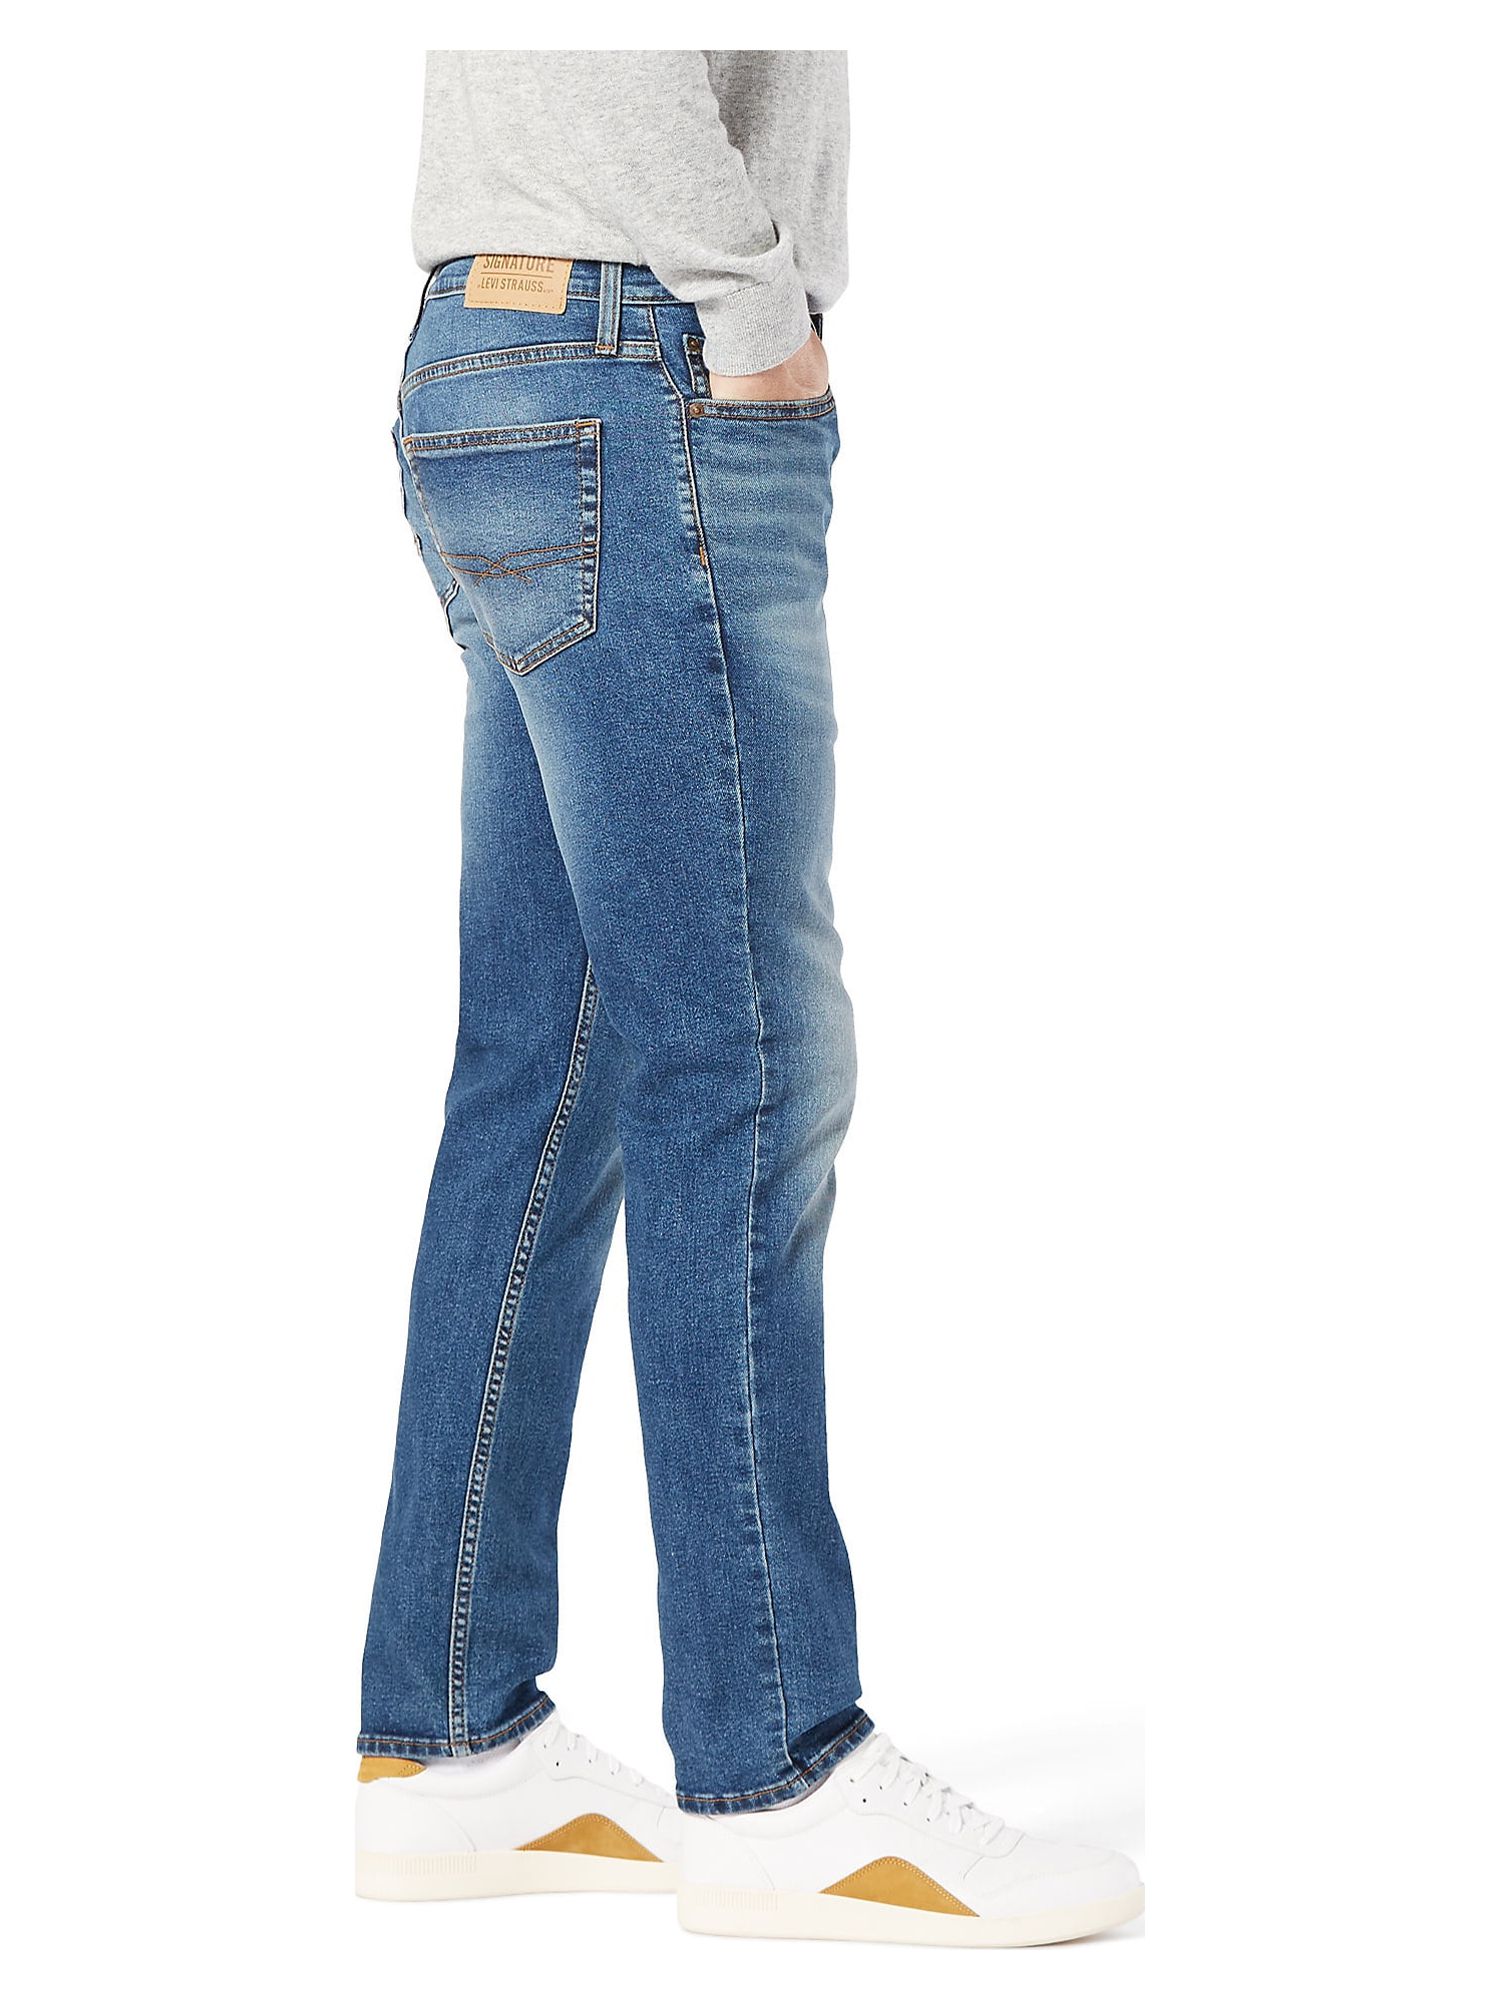 Signature by Levi Strauss & Co. Men’s and Big and Tall Slim Fit Jeans - image 3 of 5